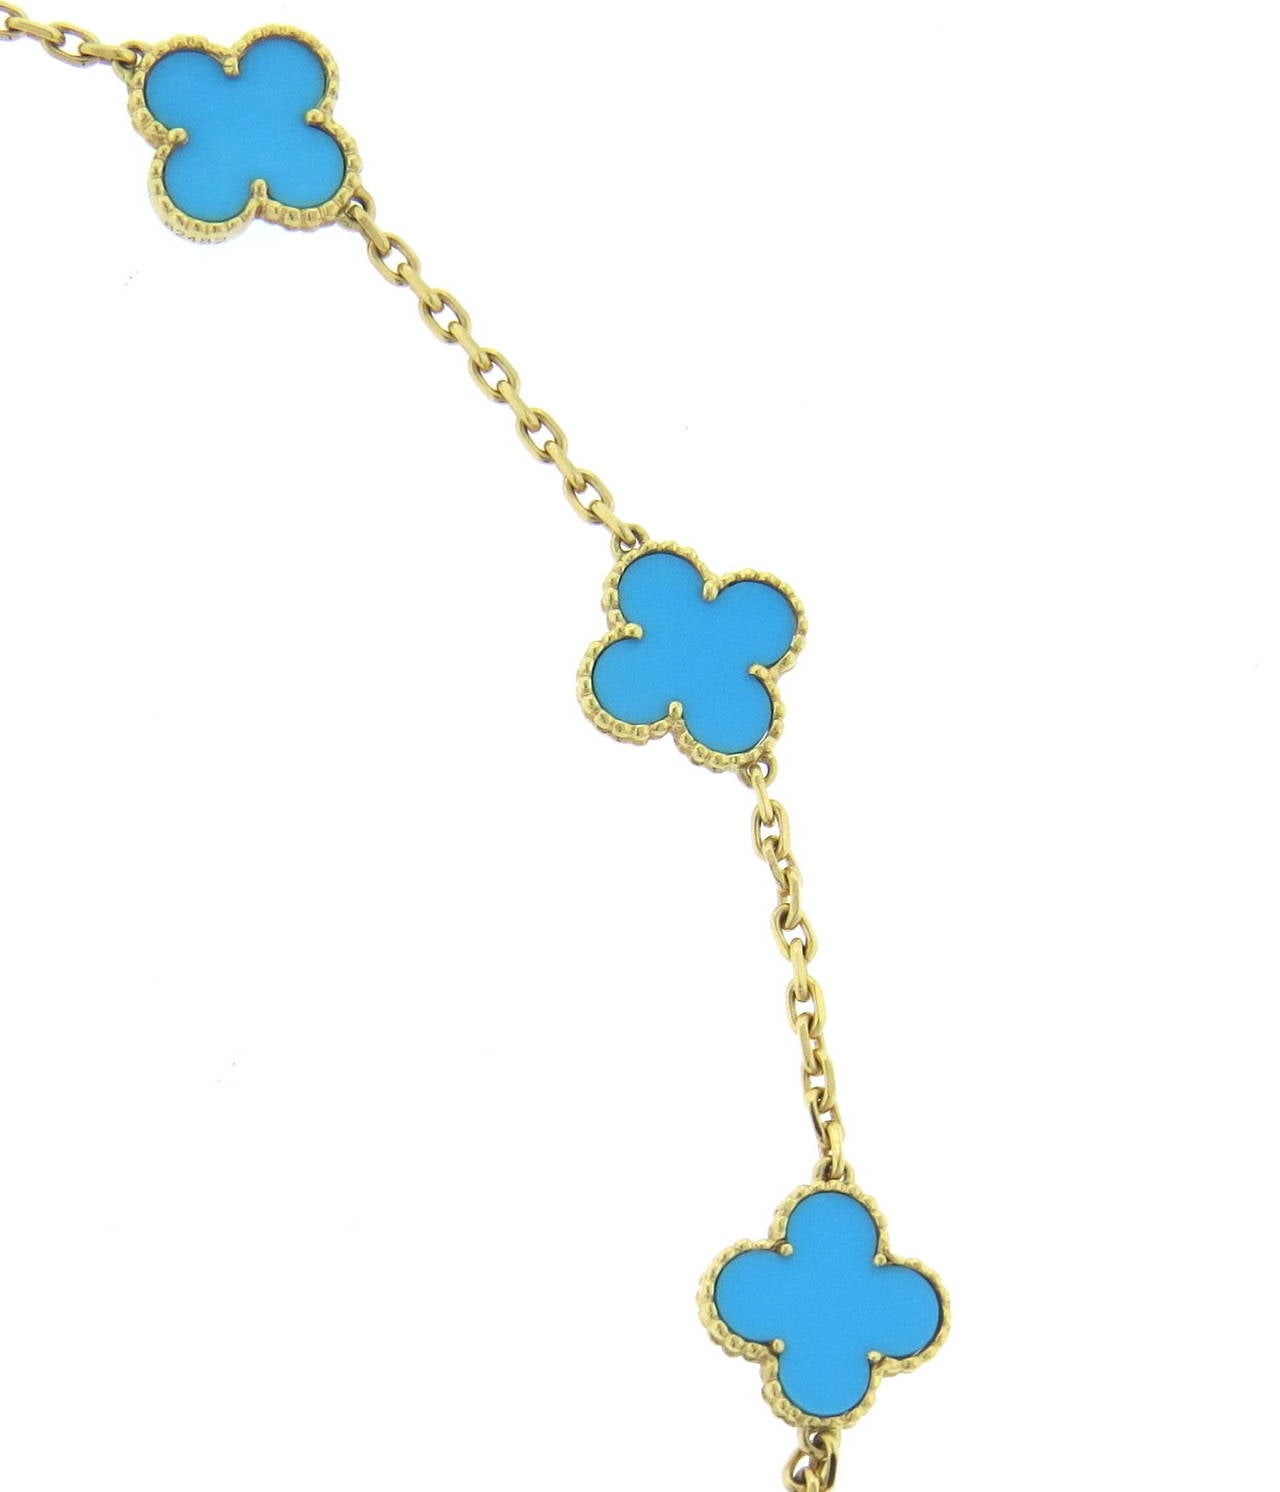 An 18k yellow gold necklace set with 10 turquoise alhambra clovers.  The necklace weighs 21.0 grams and measures 16.5